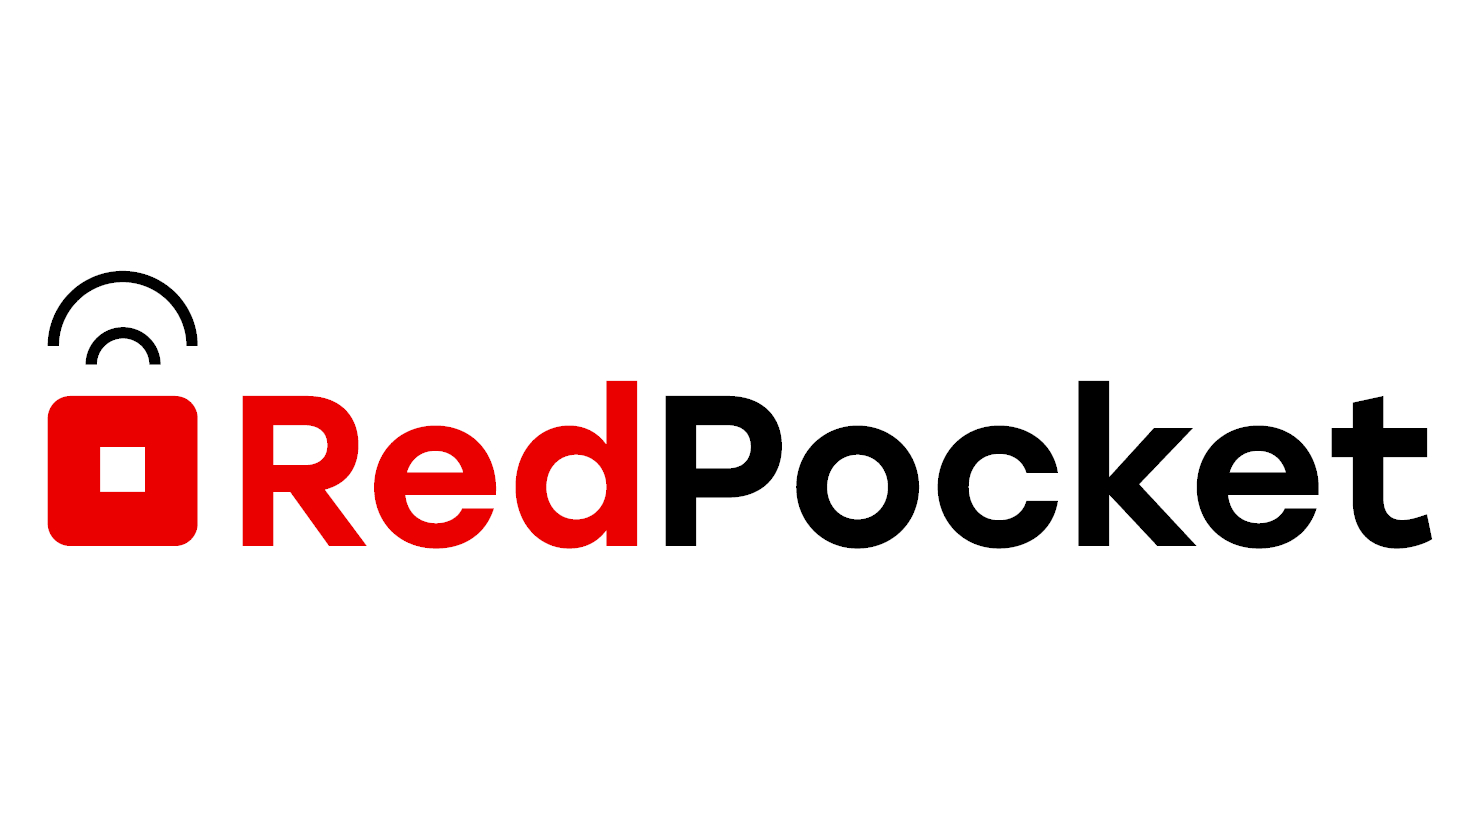 New Monthly $5 Phone Plan: 500 Minutes - Red Pocket Mobile - $60